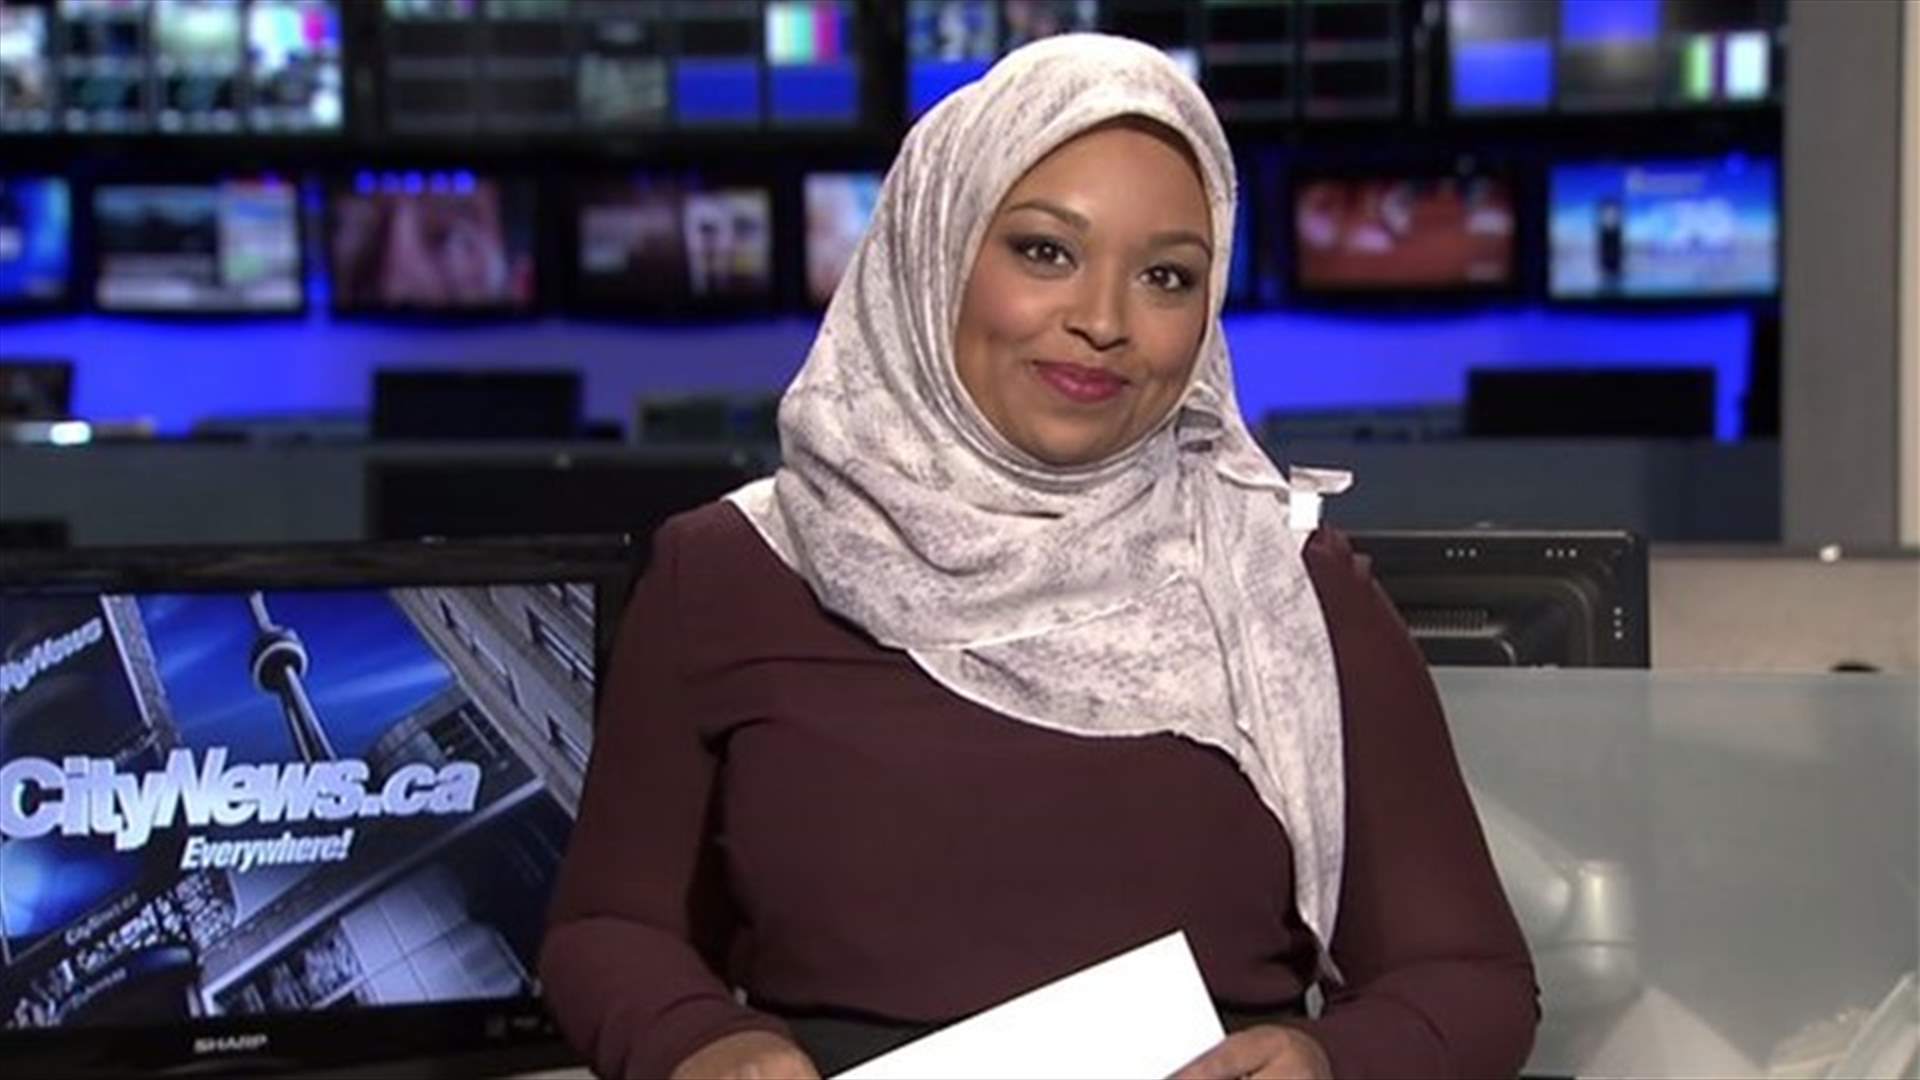 Reporter Becomes Canada’s First Hijab-Wearing TV News Anchor